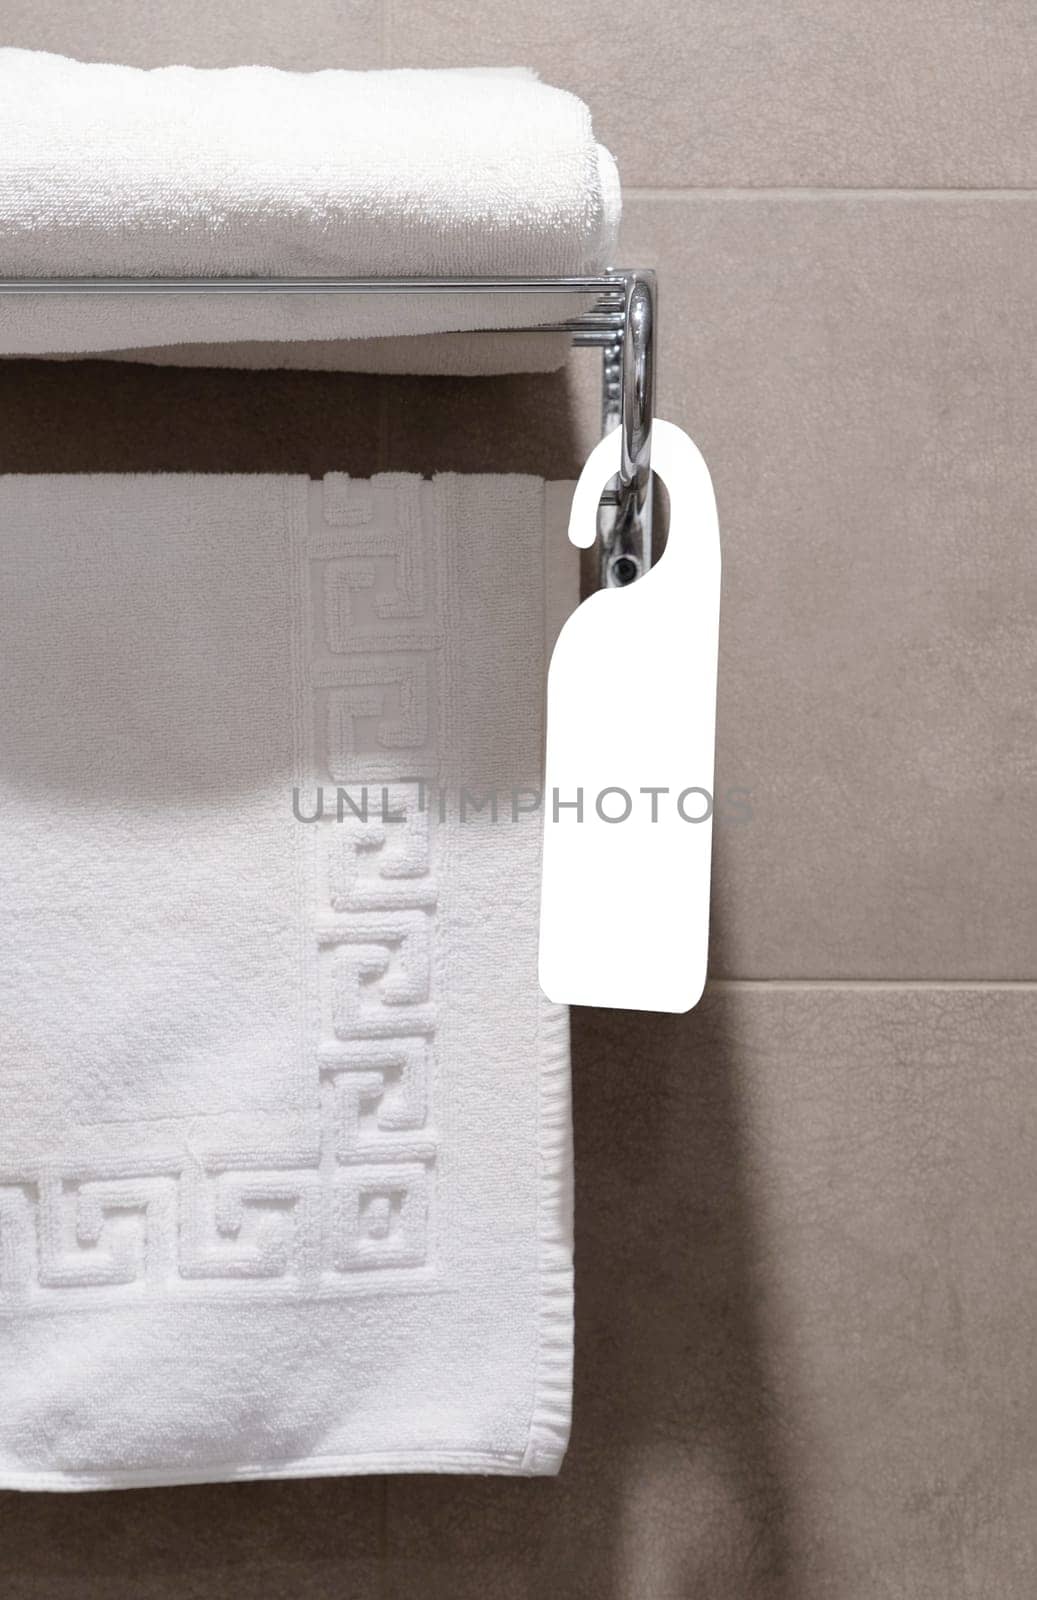 Set of white towels in the bathroom of a hotel room hung on a hanger with blank tag by Desperada